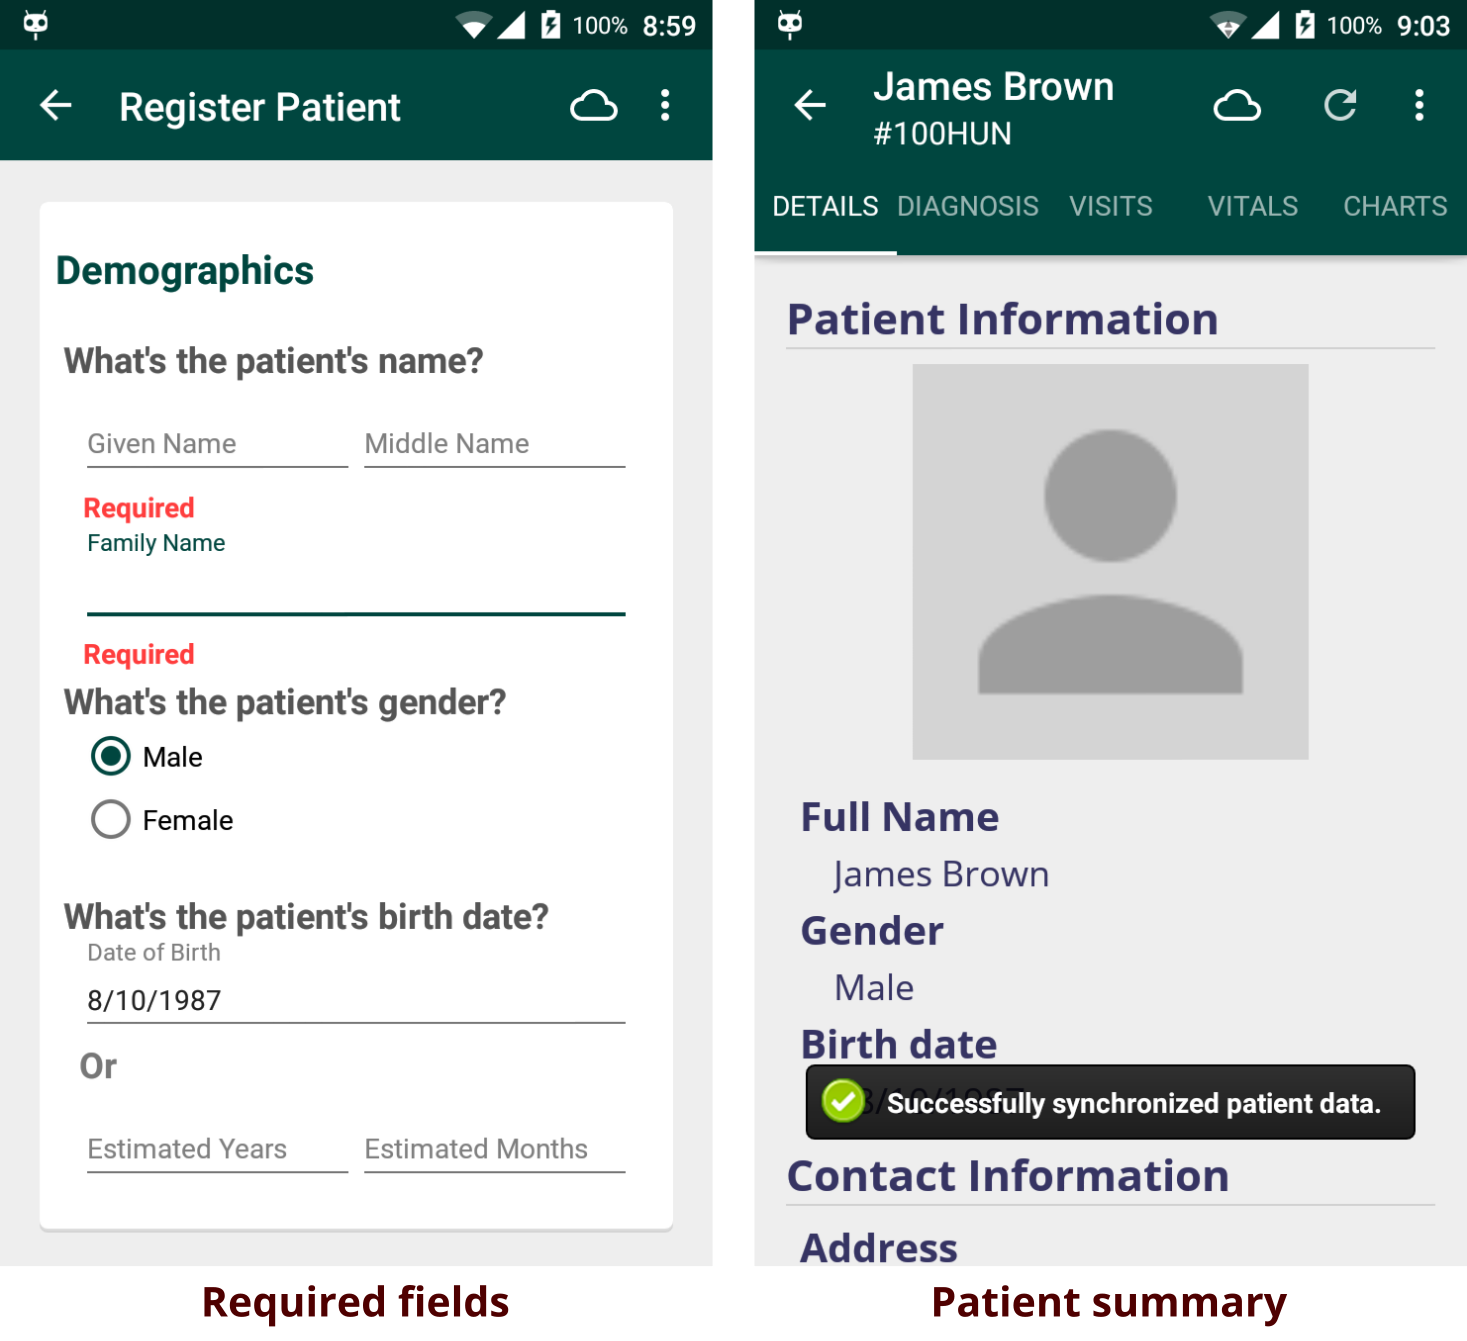 Required fields and patient summary